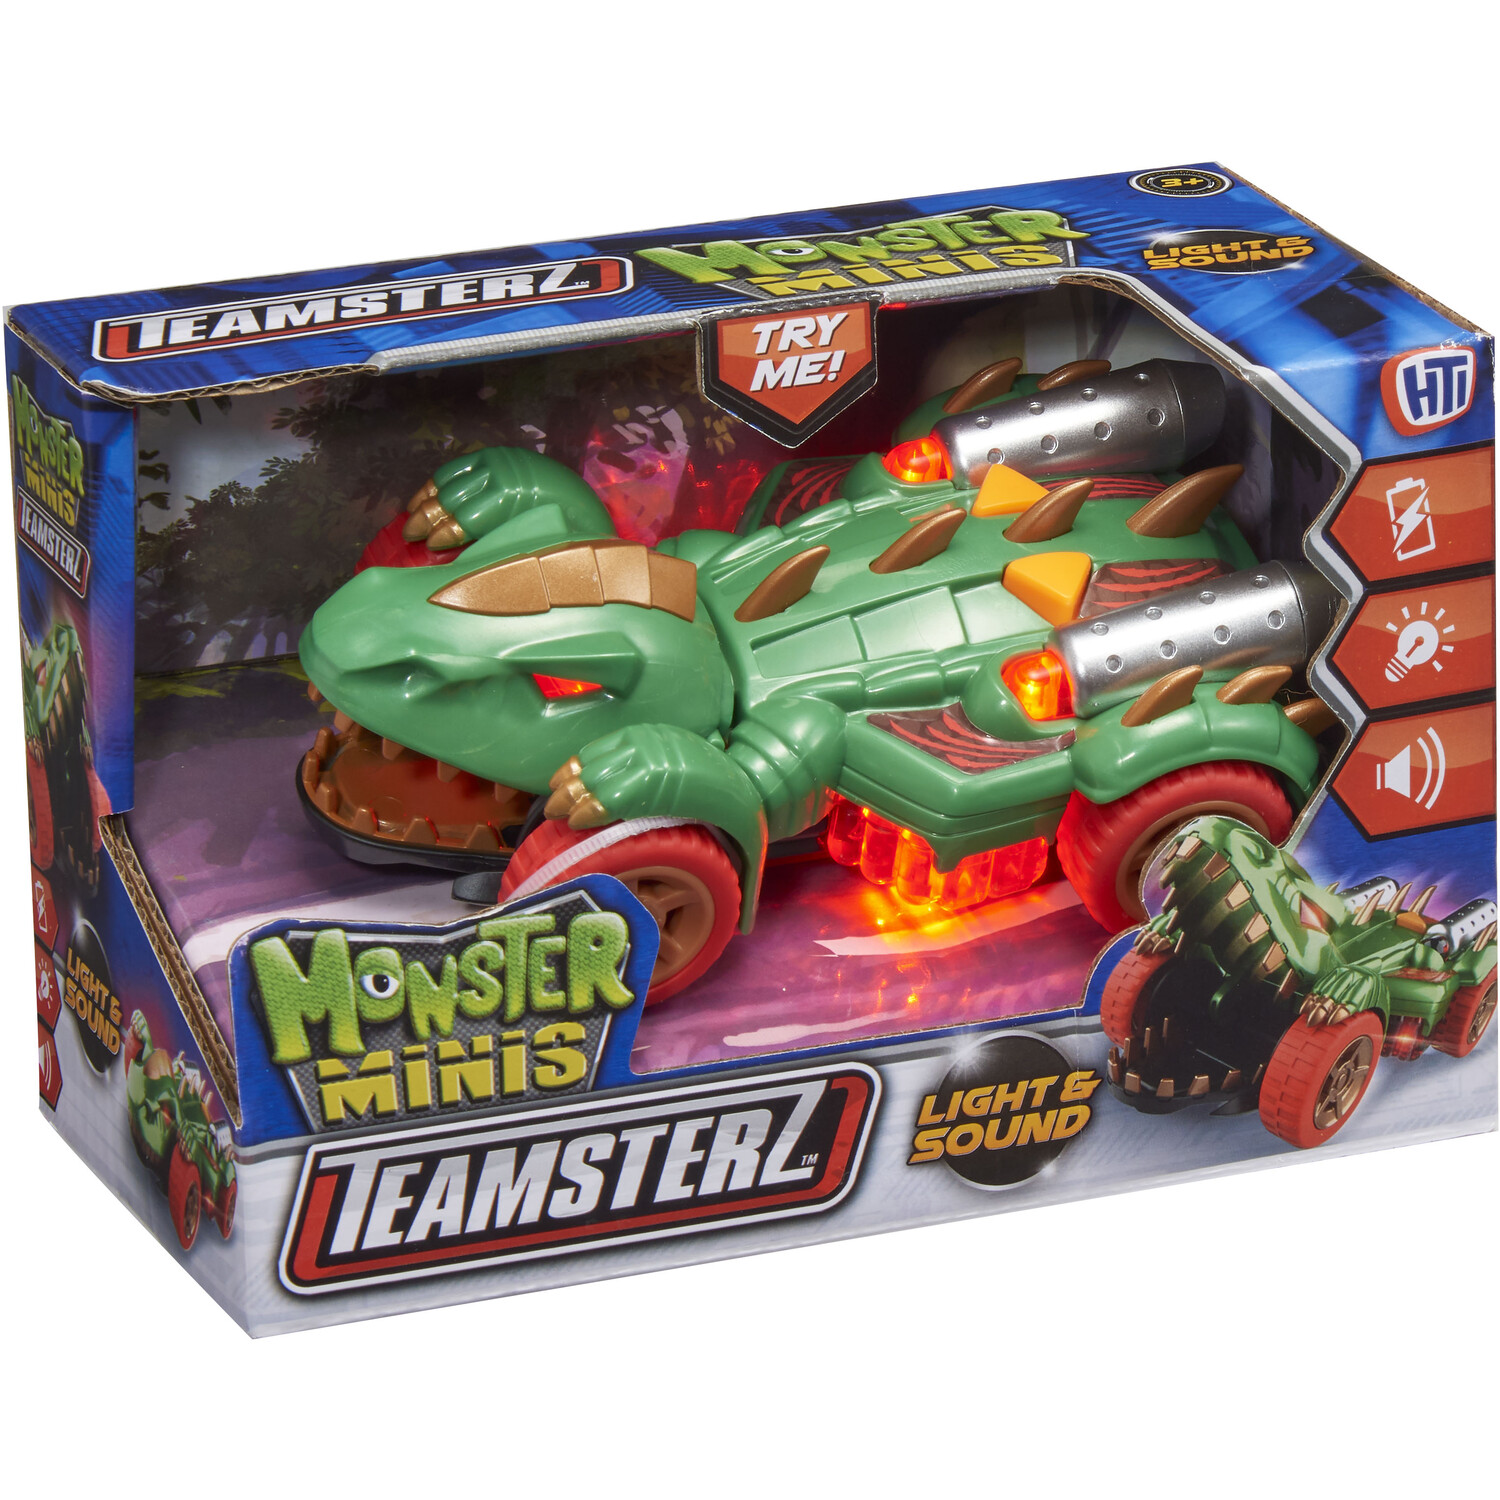 Teamsterz Monster Minis Light and Sound Dino - Green Image 2